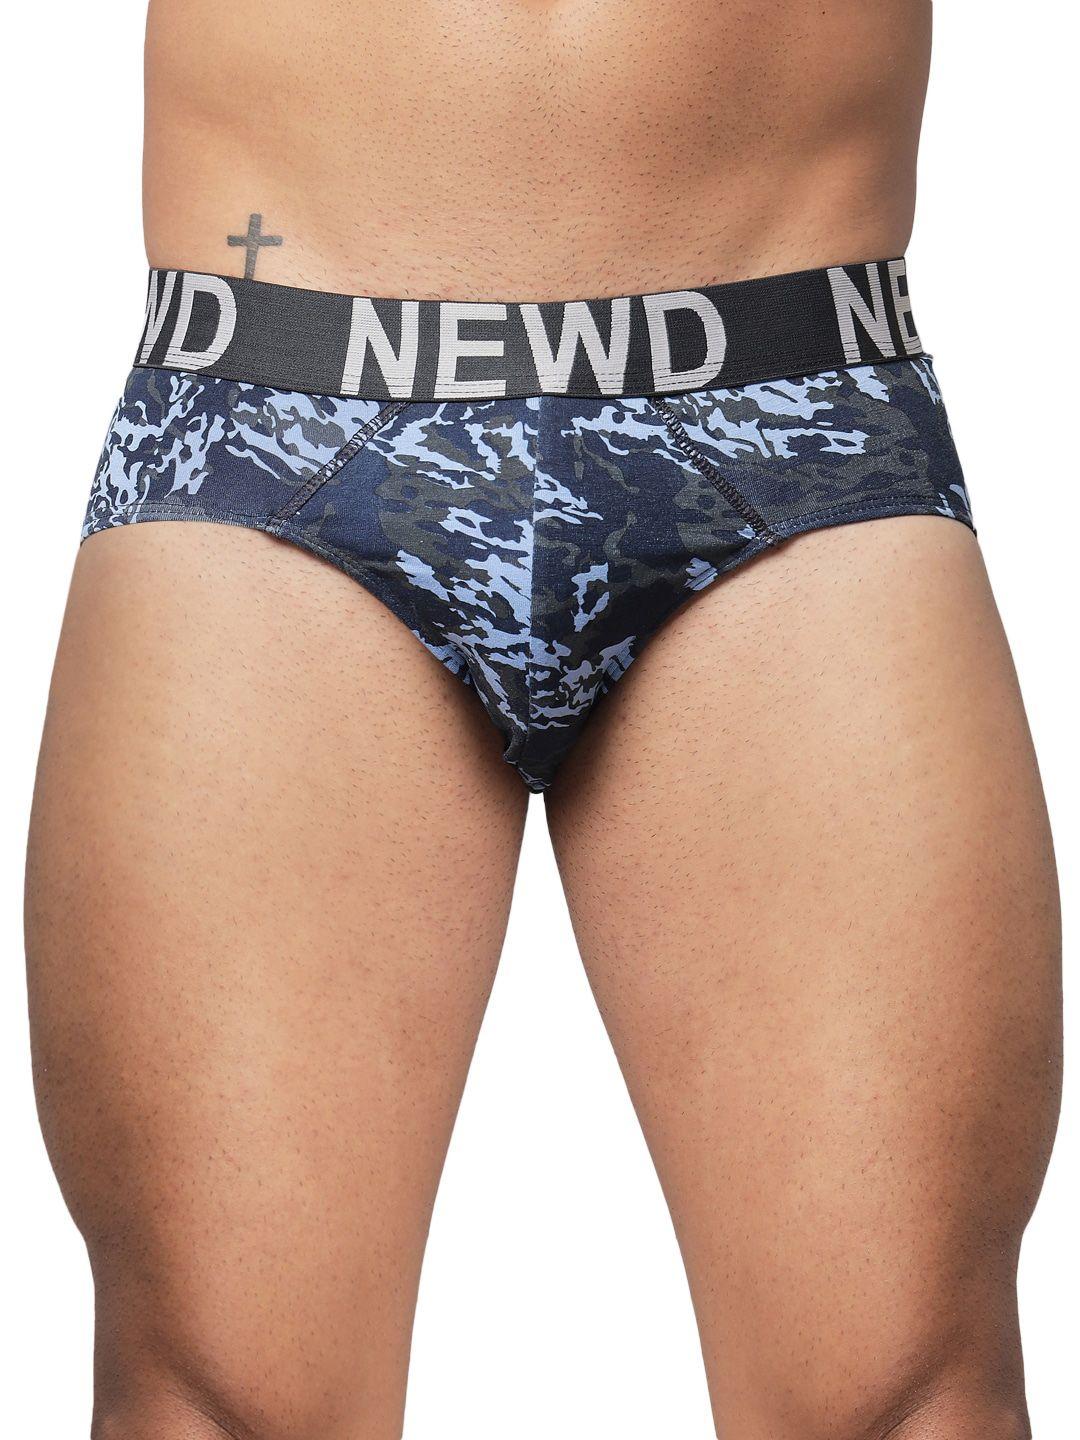 newd mid-rise camouflage printed basic briefs nbp12-blue-s